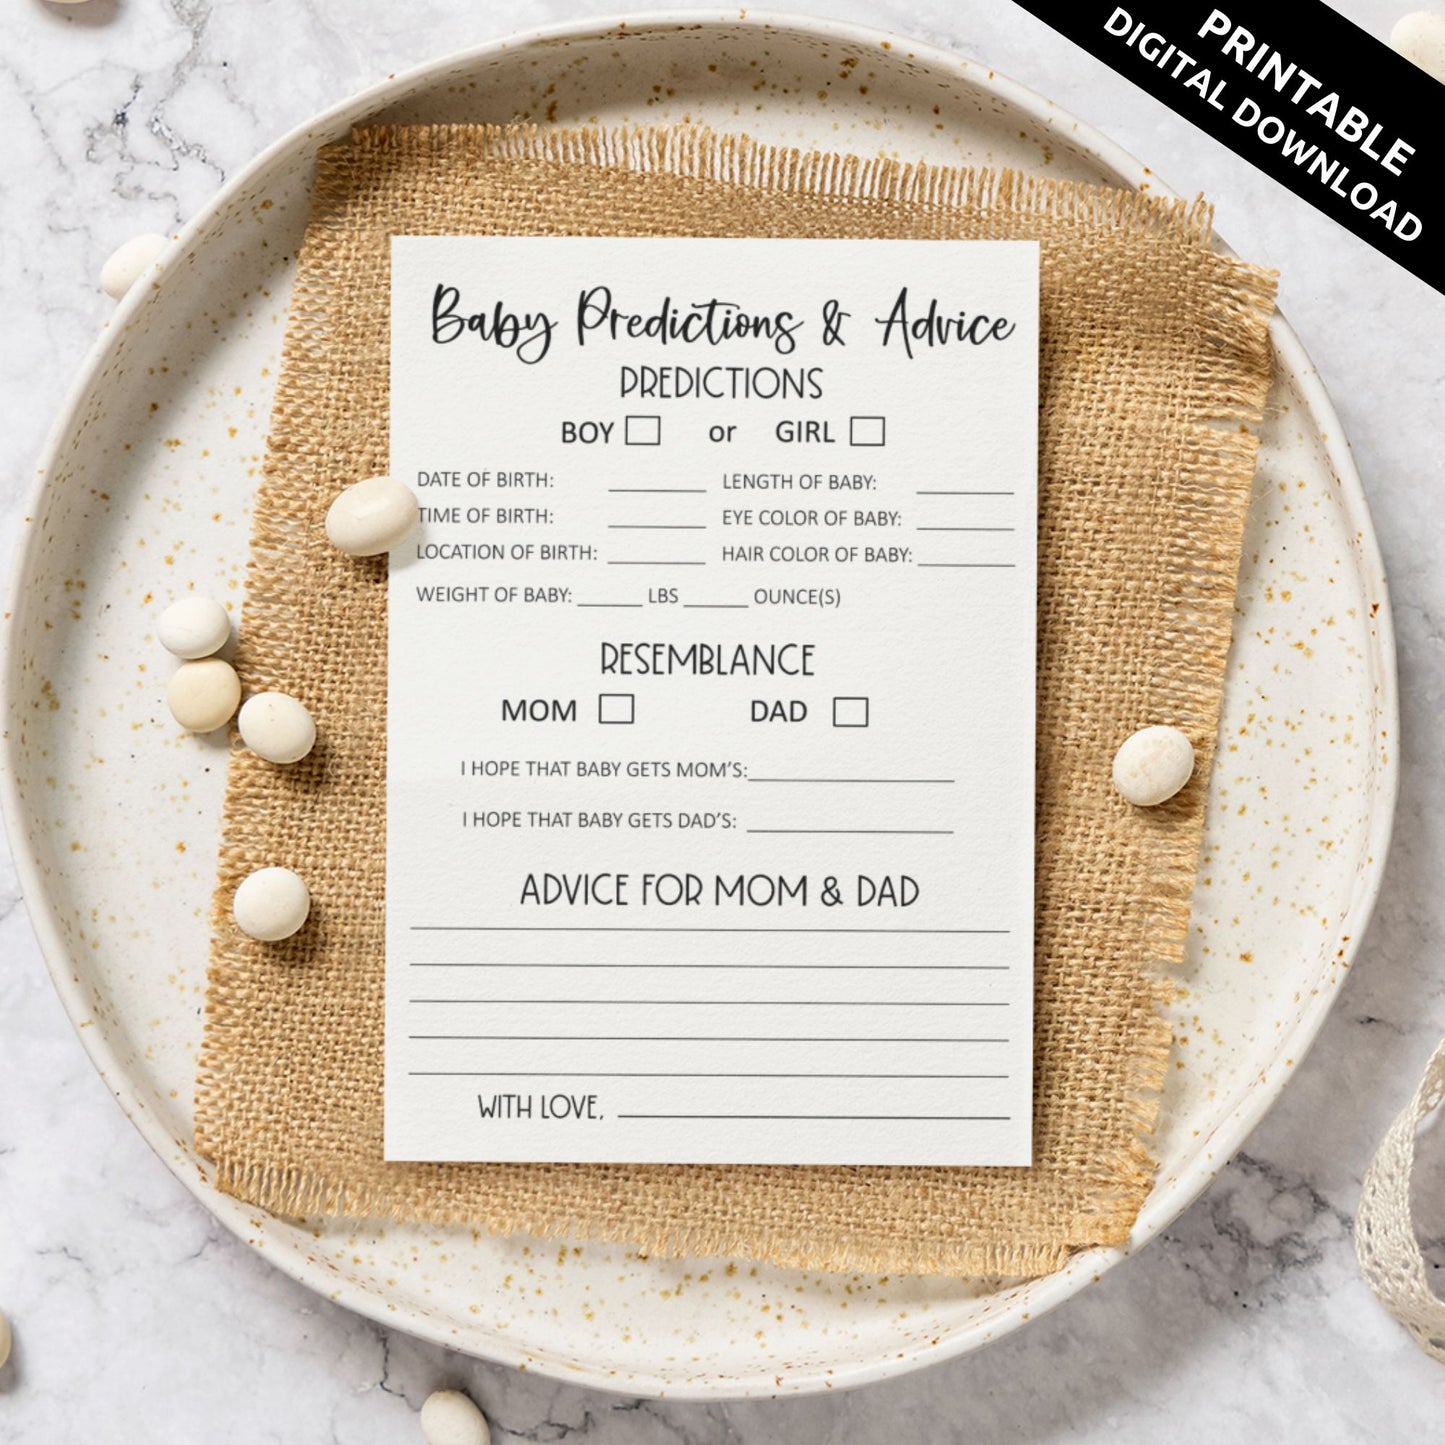 Baby Predictions and Advice Card Minimalists